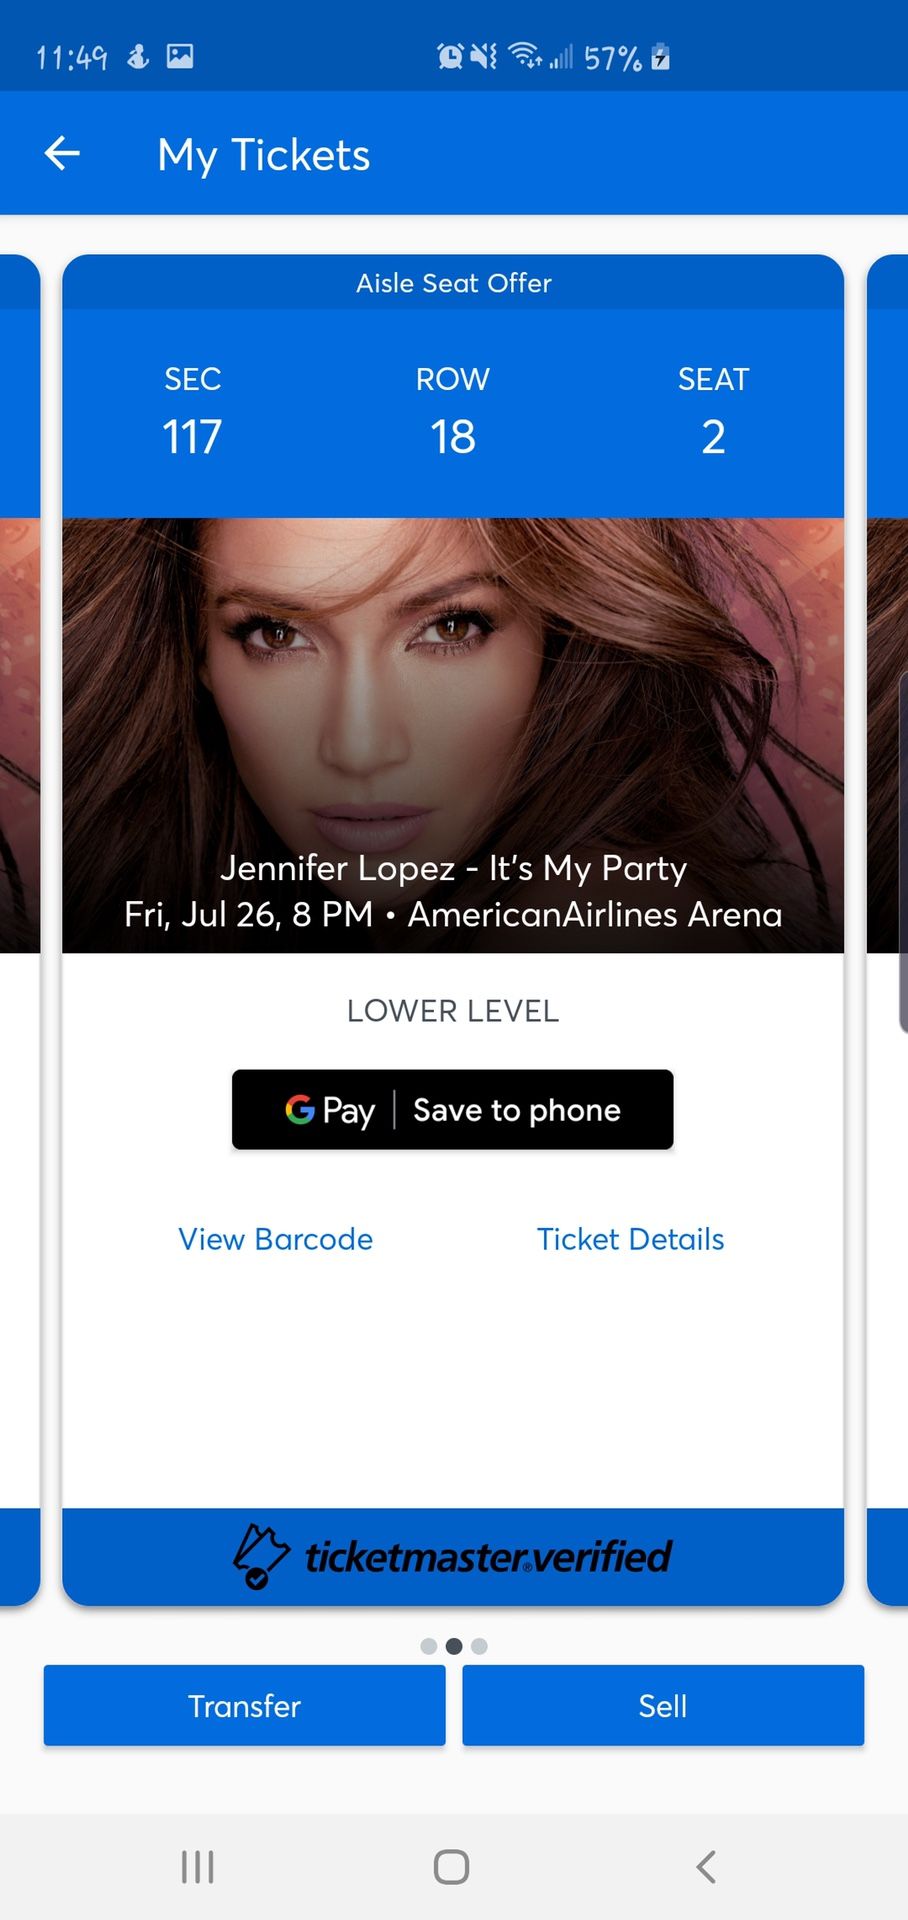 2 Jennifer Lopez Miami Tickets for Friday Concert